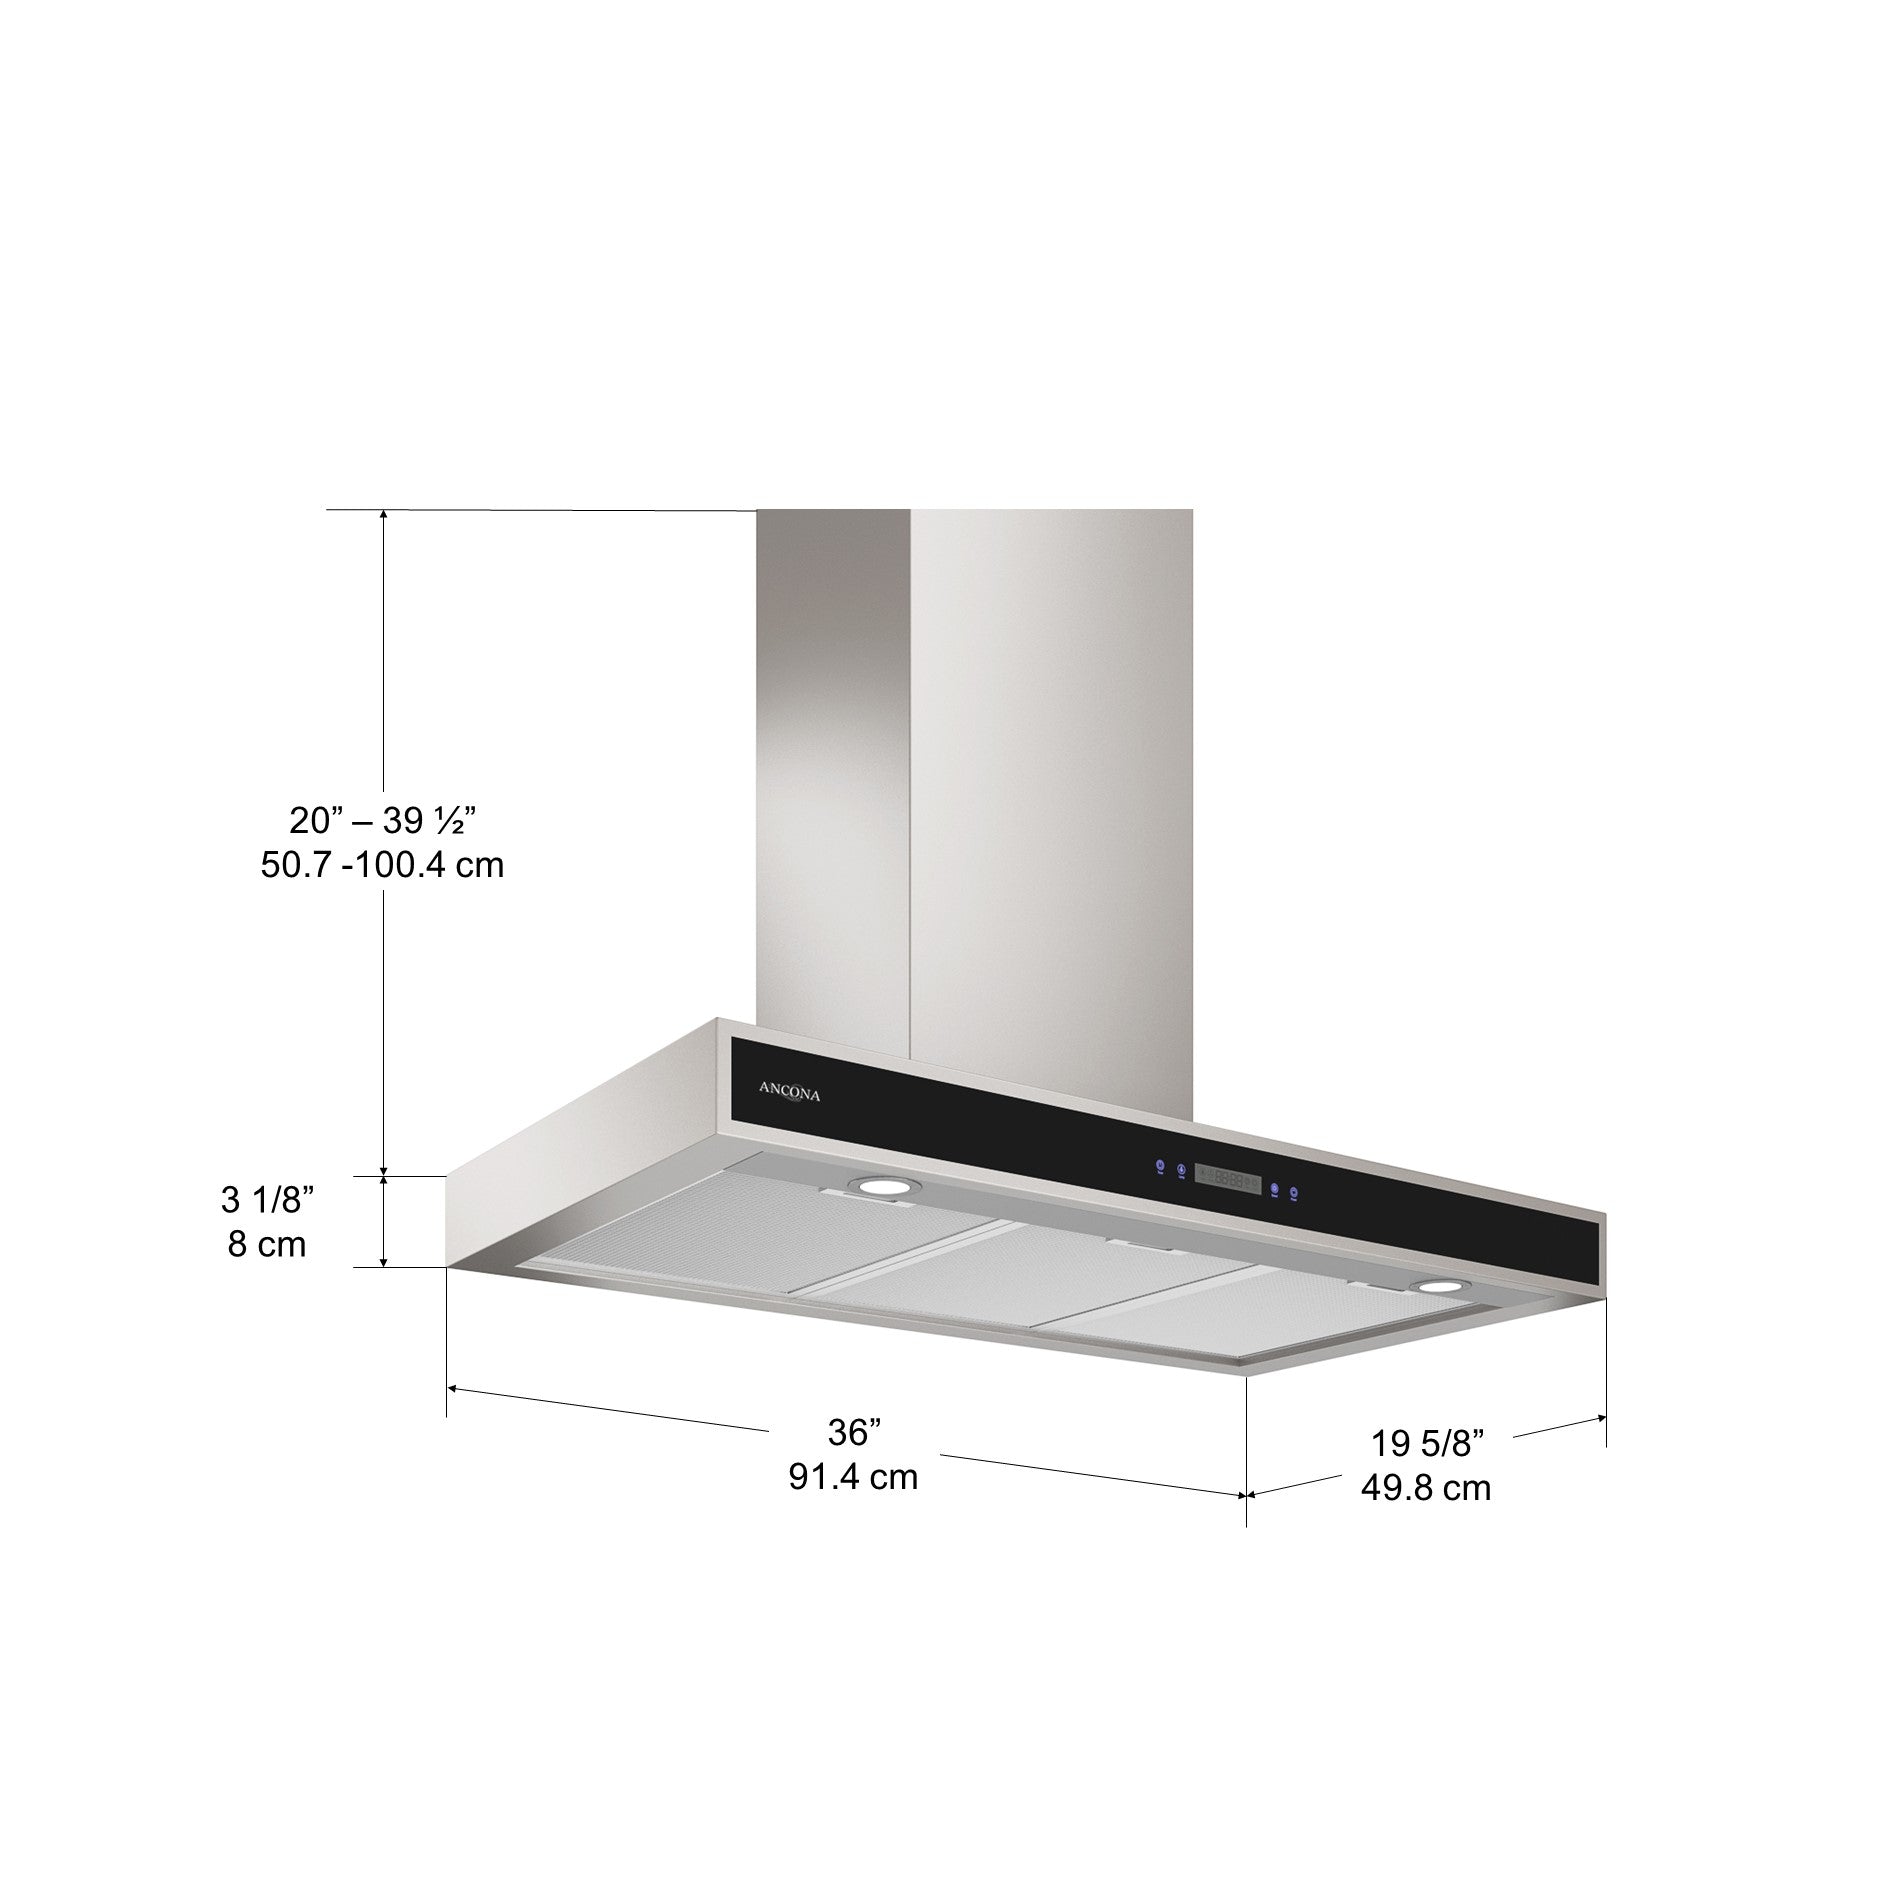 WRP436 36 in. Convertible Wall Mounted Range Hood with LED Lights in Stainless Steel